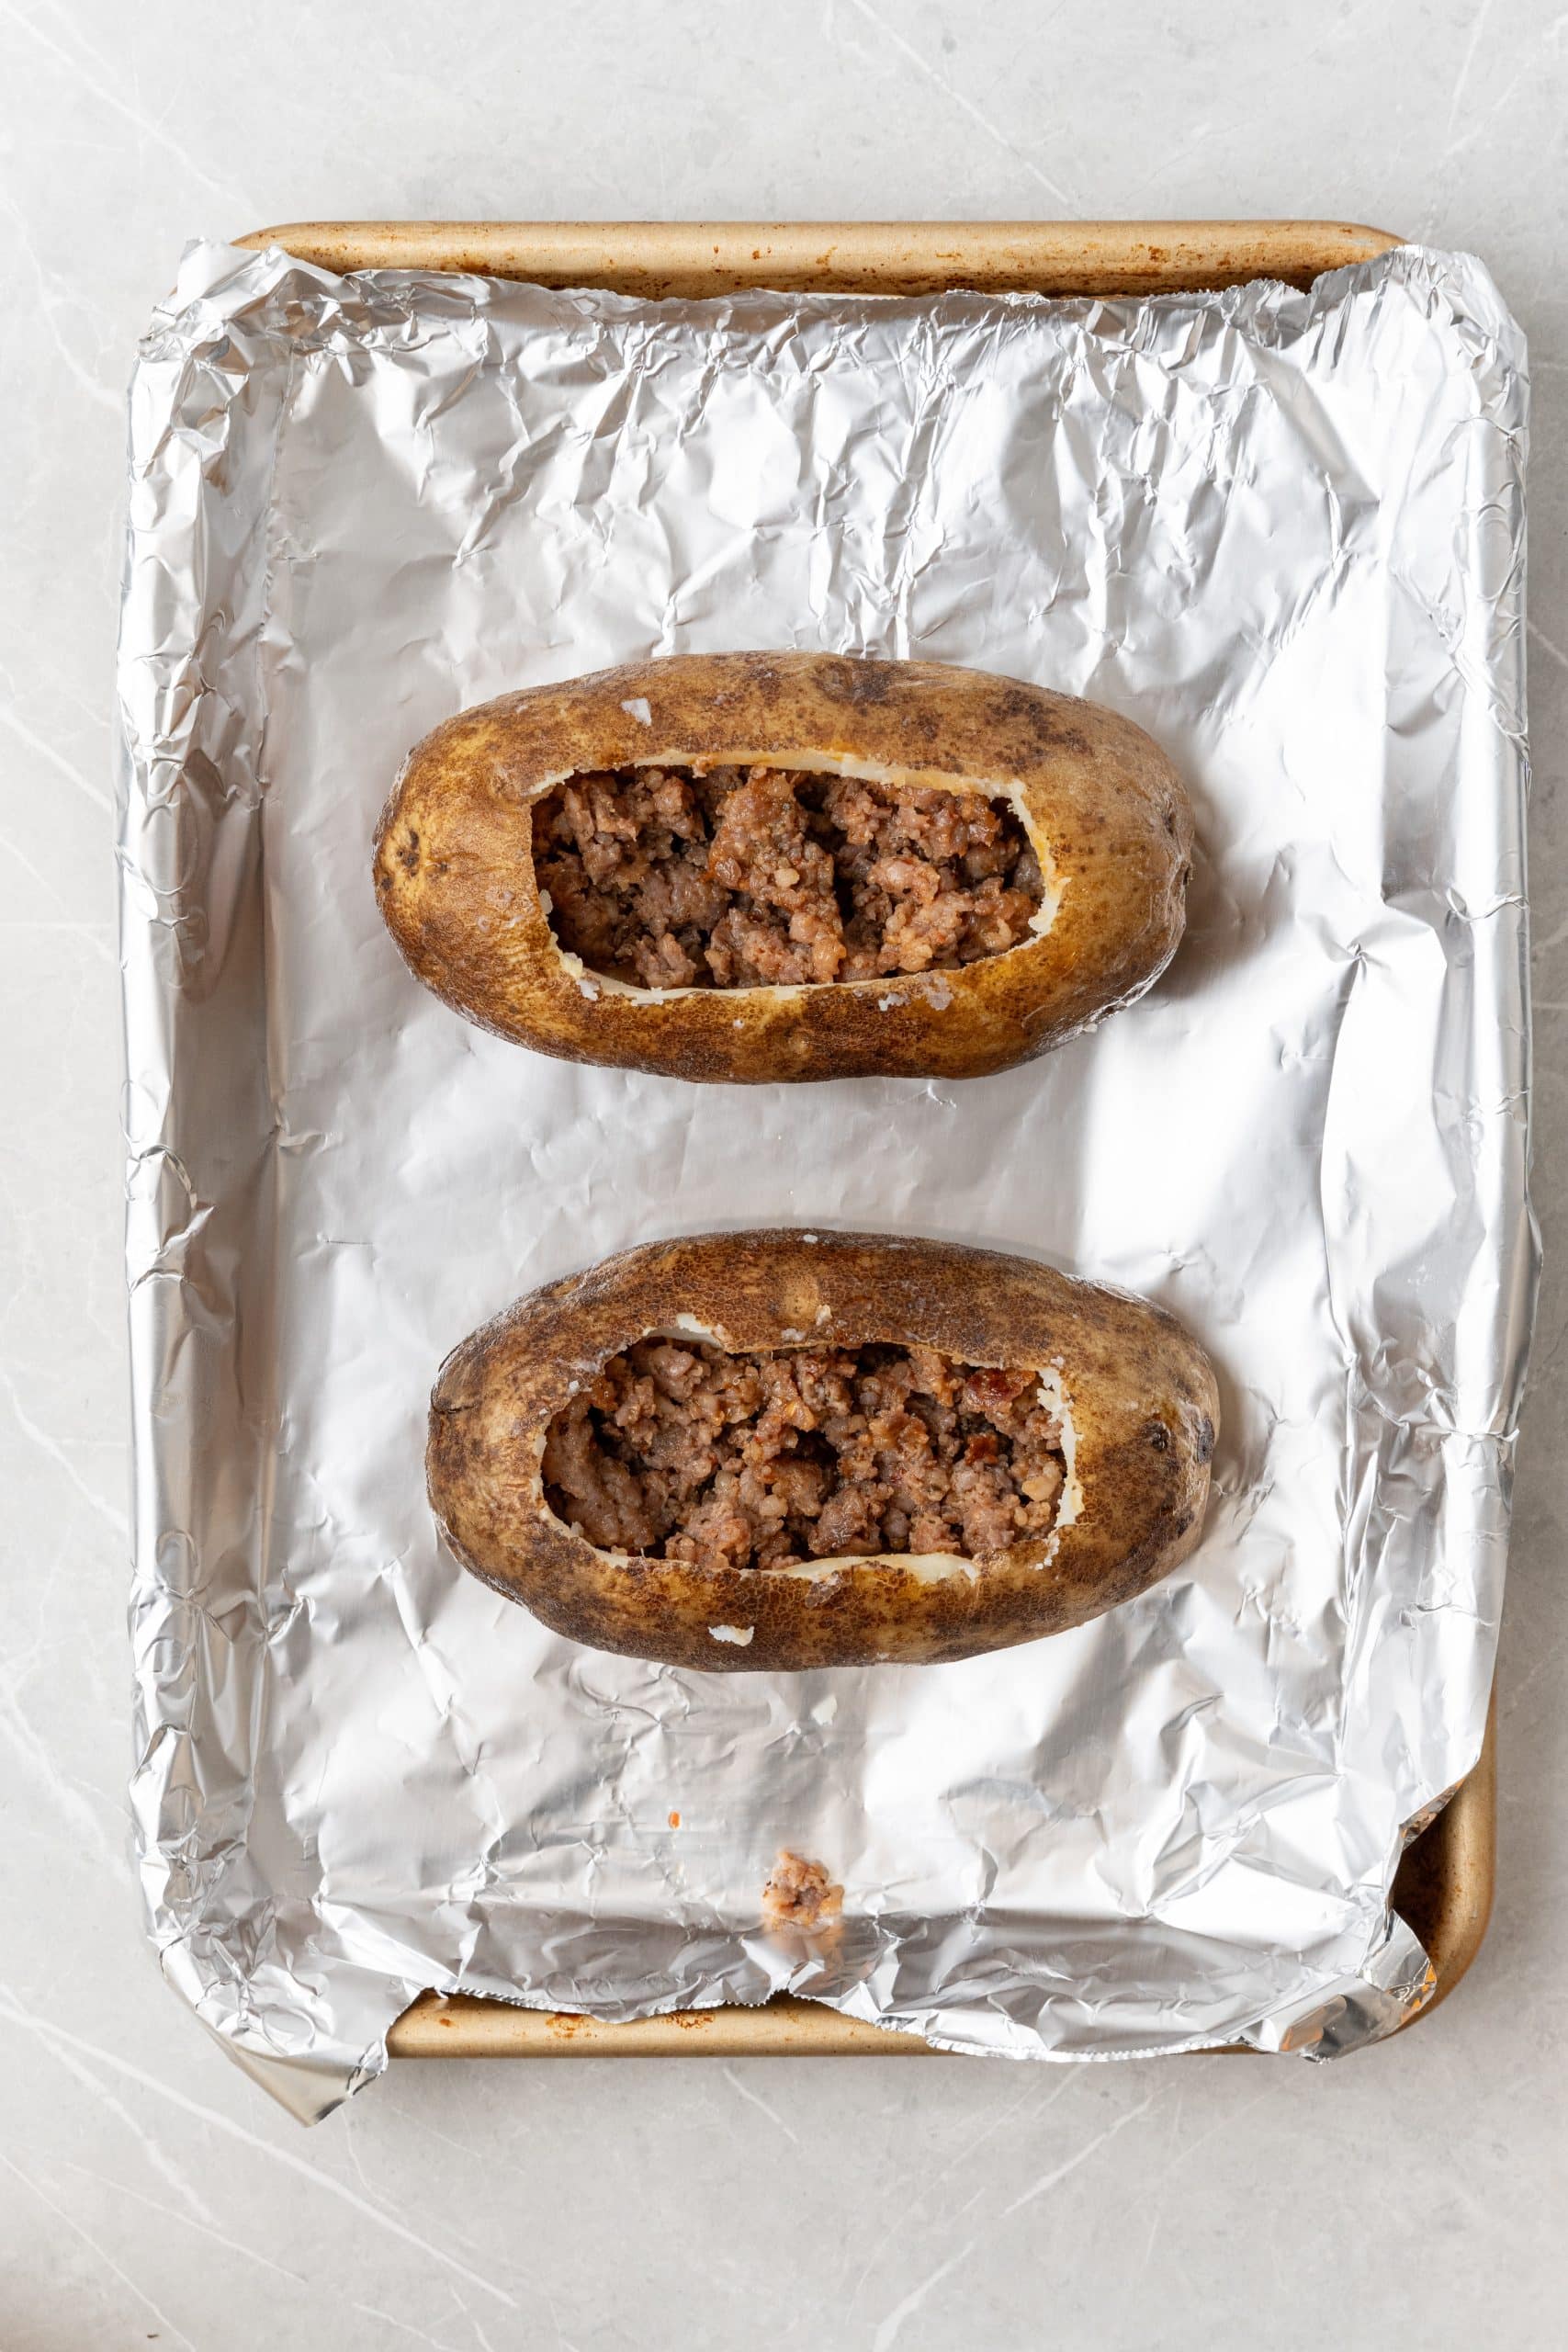 sausage filled hollowed out baked potatoes on a foil lined baking sheet